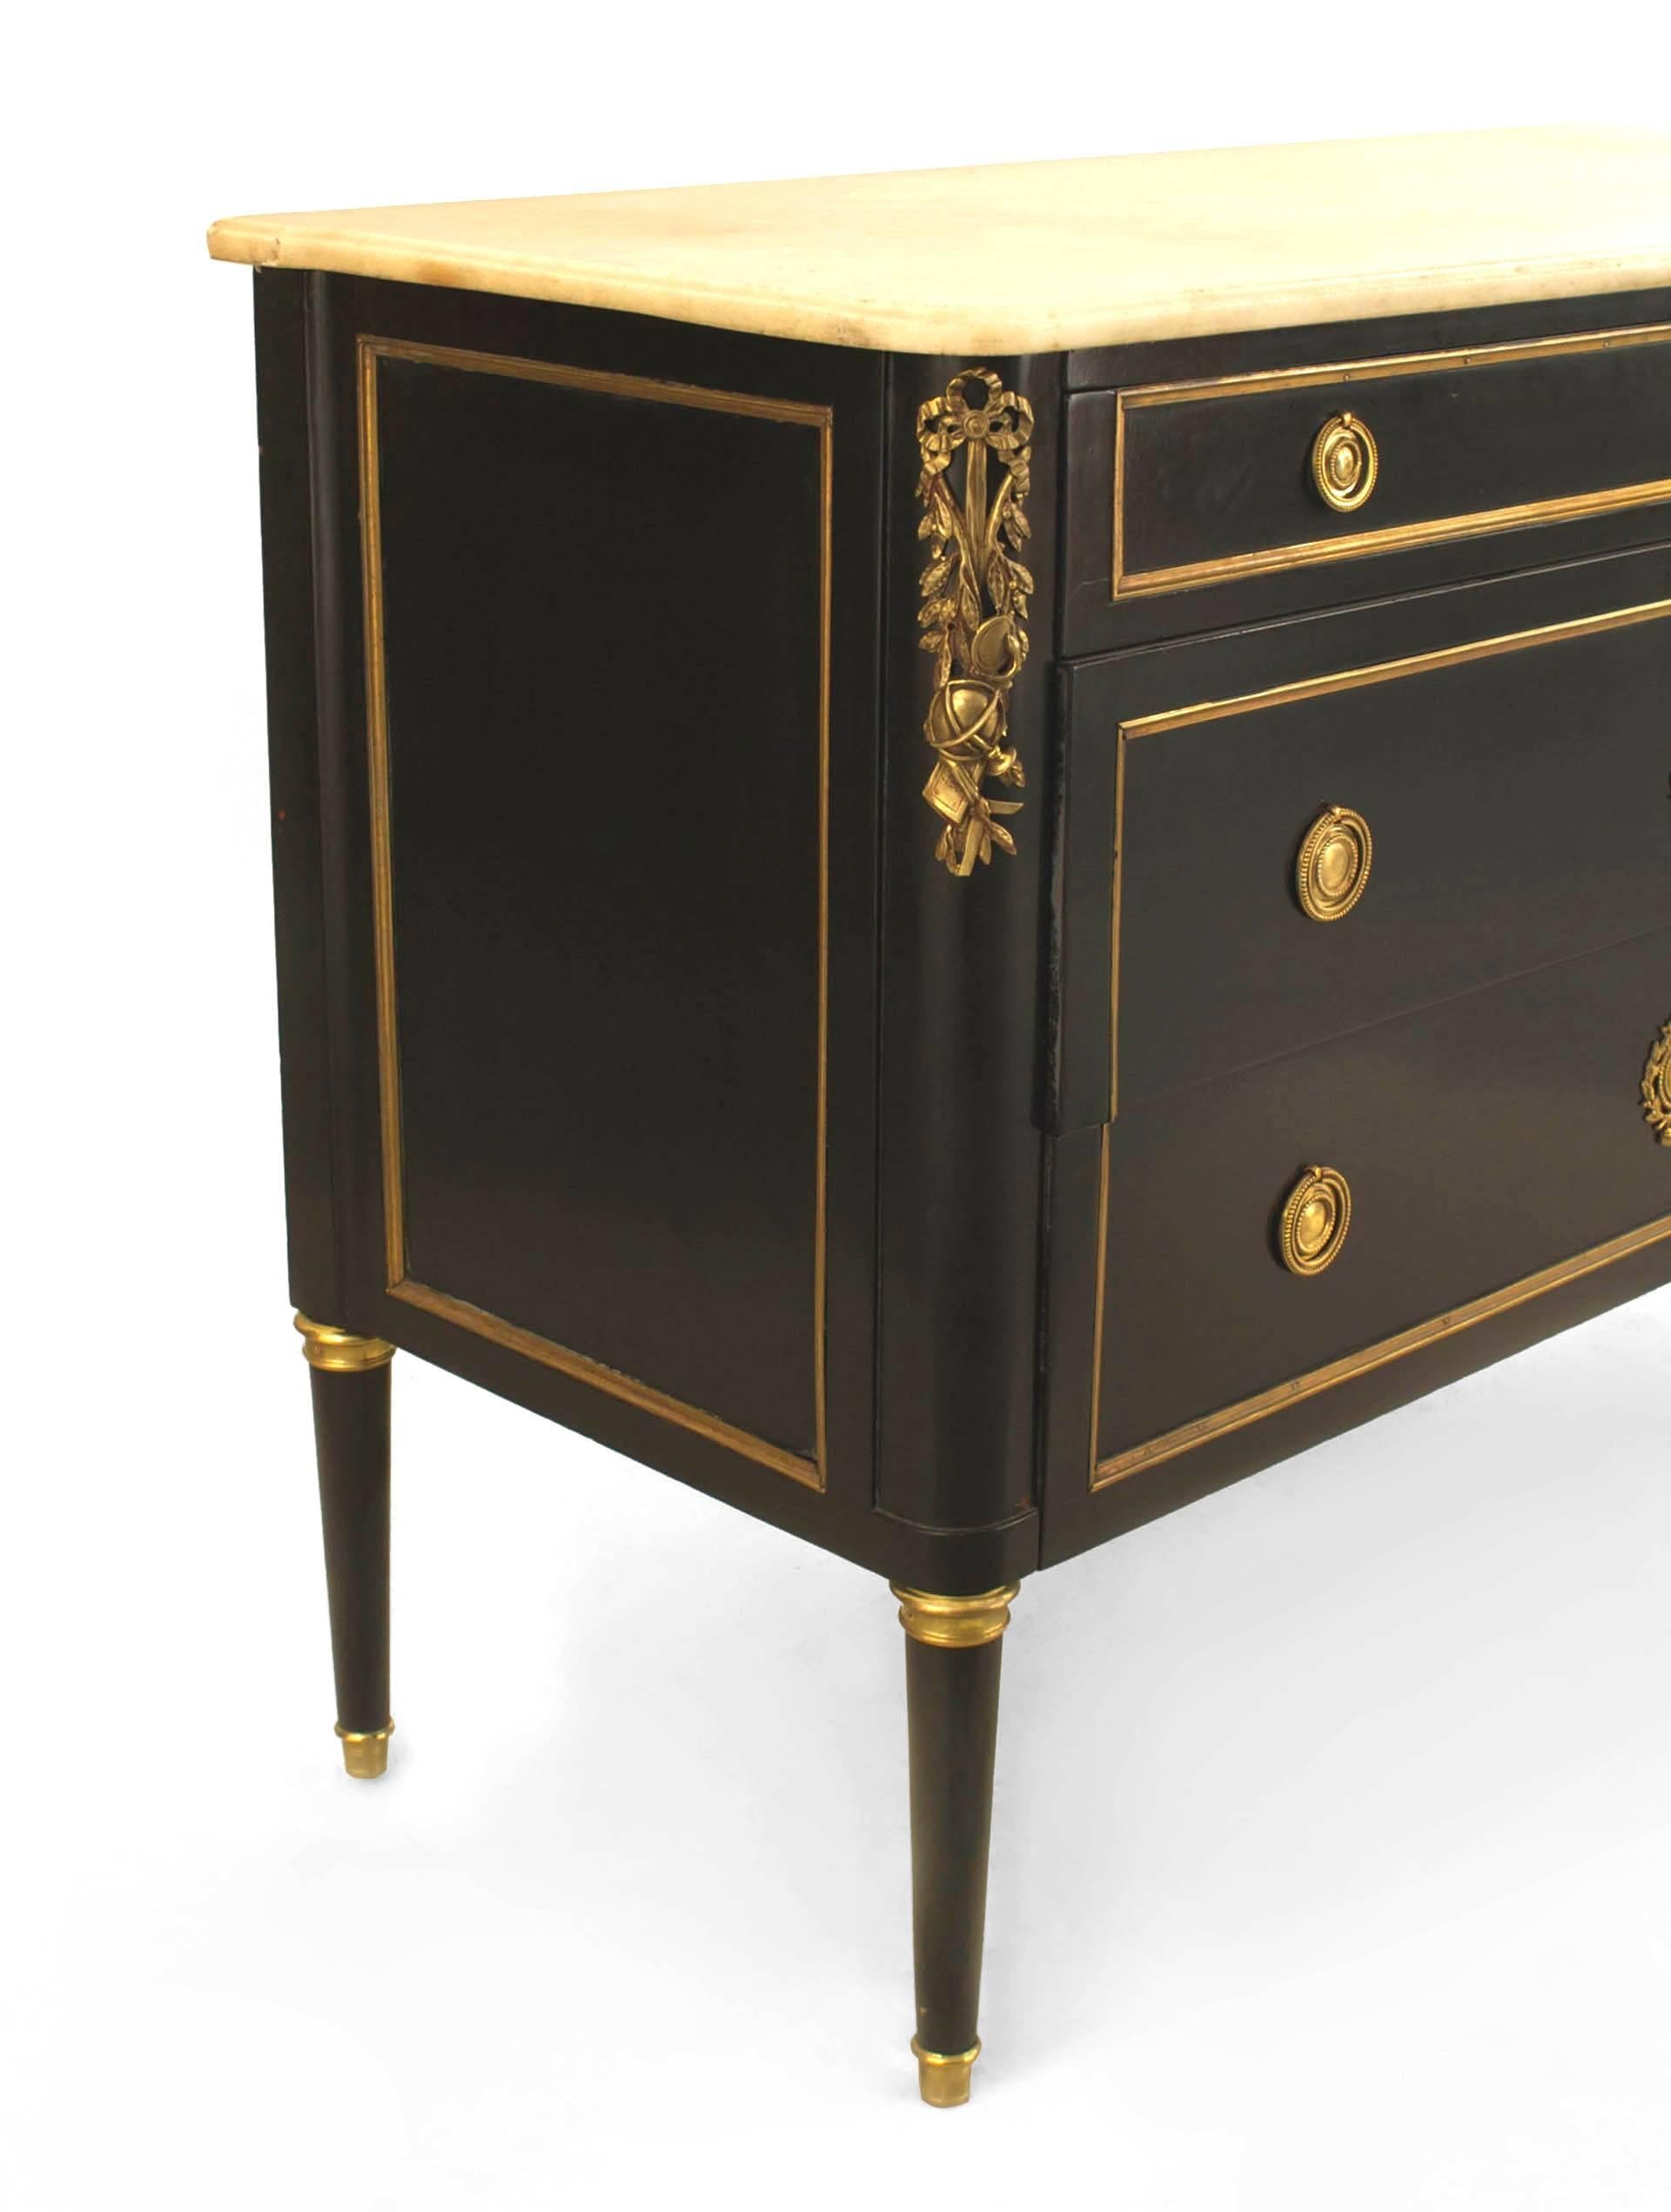 French Louis XVI style (1940s) ebonized gilt and bronze trimmed chest with 2 large drawers under a smaller drawer having ring handles with a white marble top. (stamped: JANSEN)
